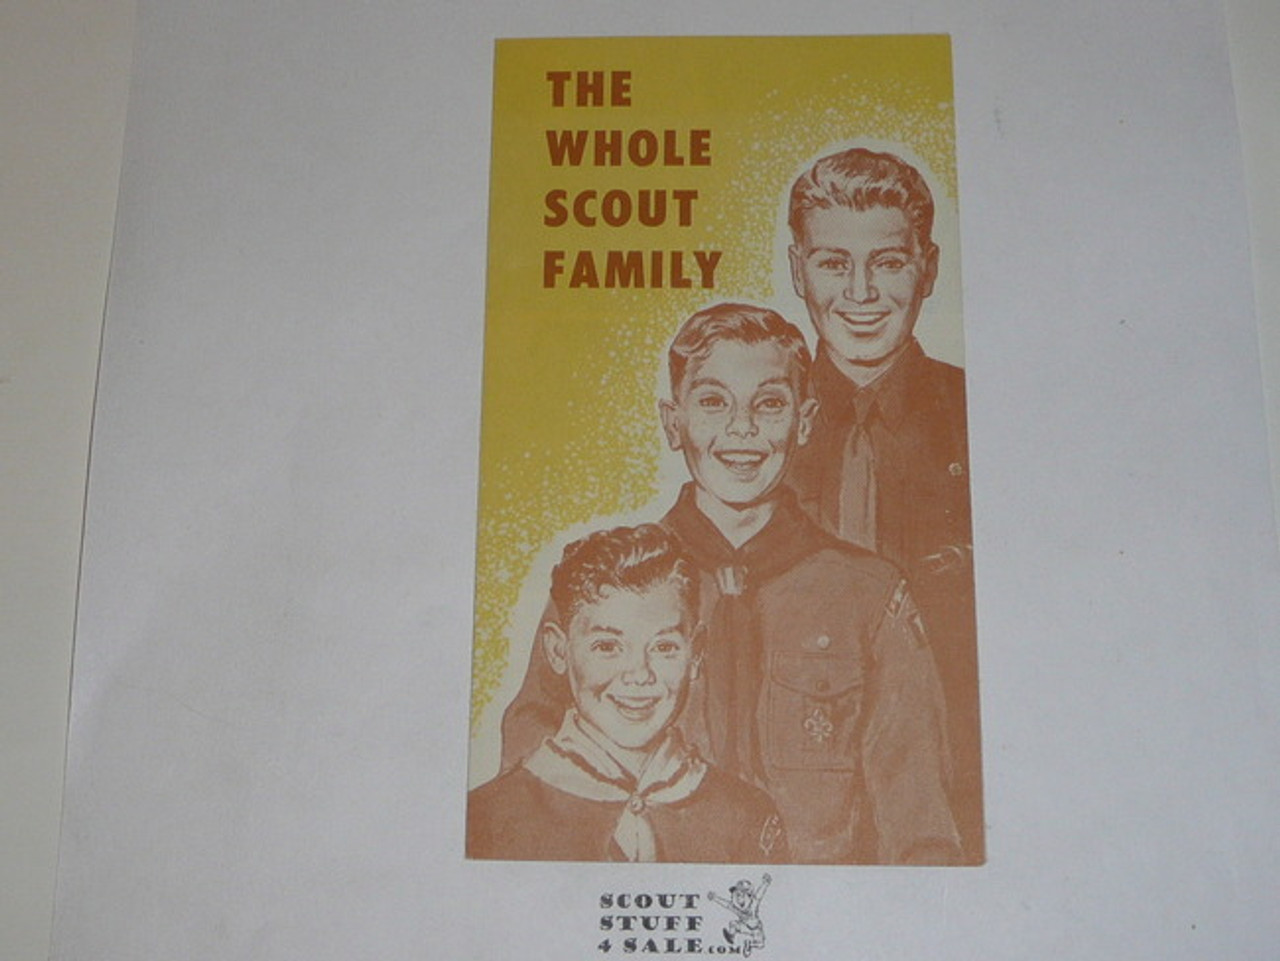 1963 The Whole Scout Family, Boy Scout Promotional Brochure, 7-63 printing